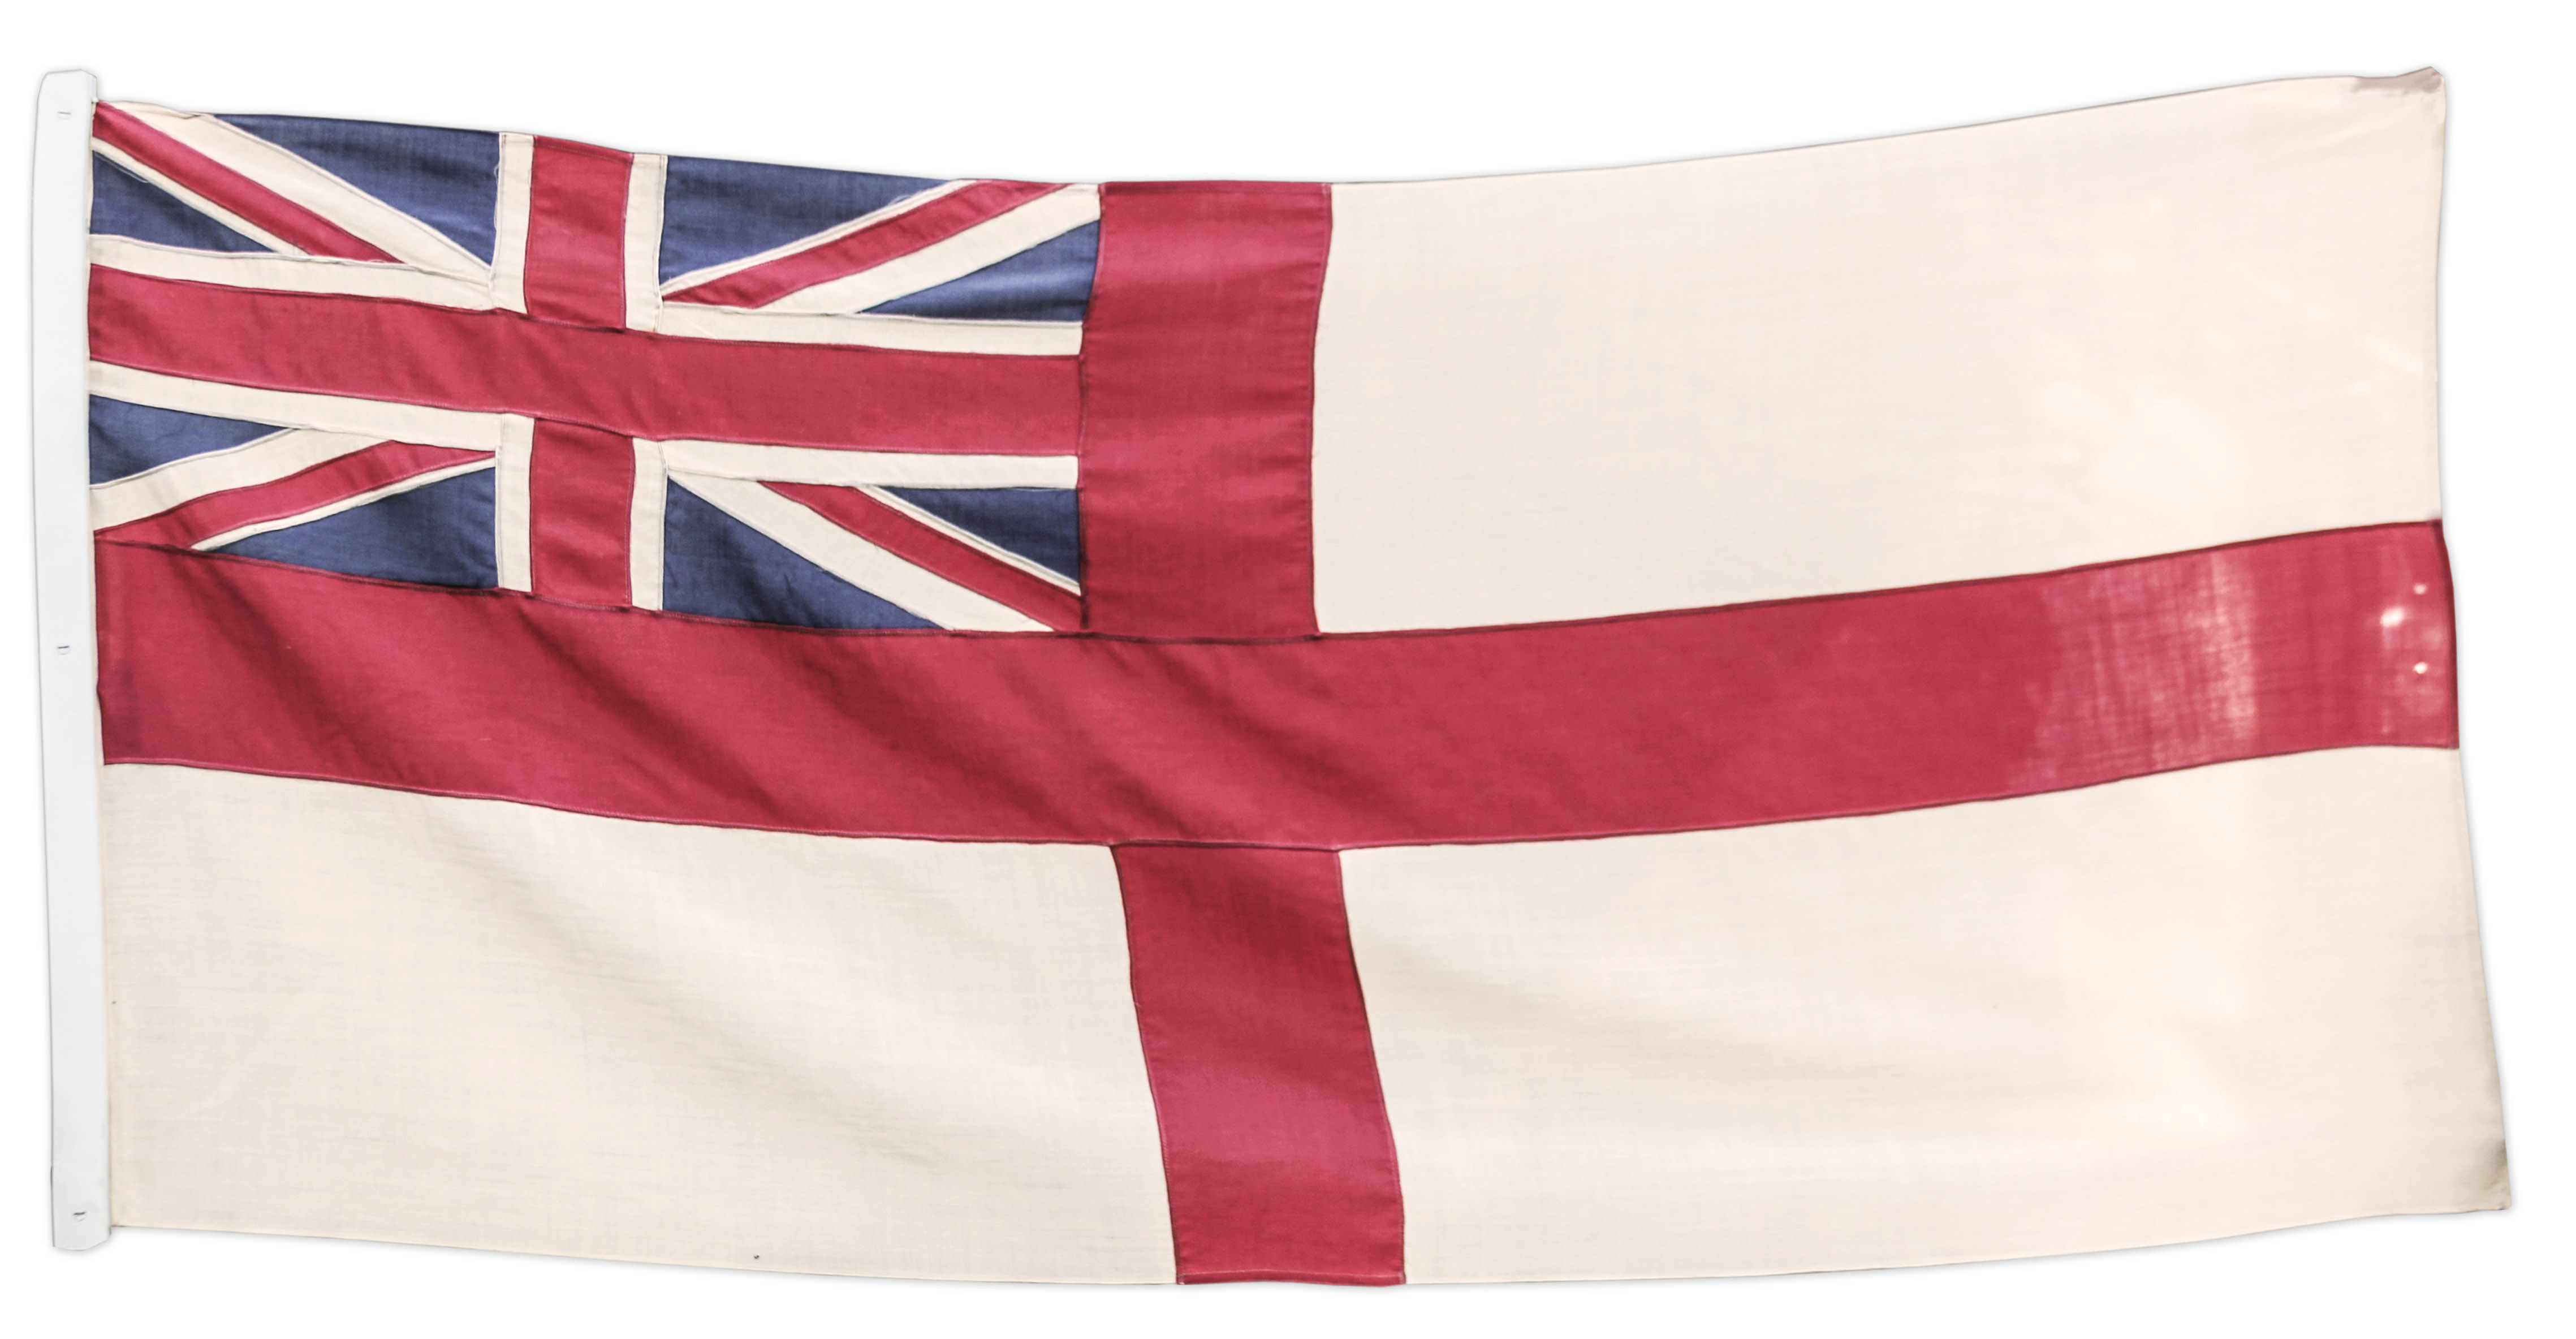 King Edward Memorabilia King Edward VIII Personally Owned British Royal Navy Flag -- With Provenance From Sotheby's